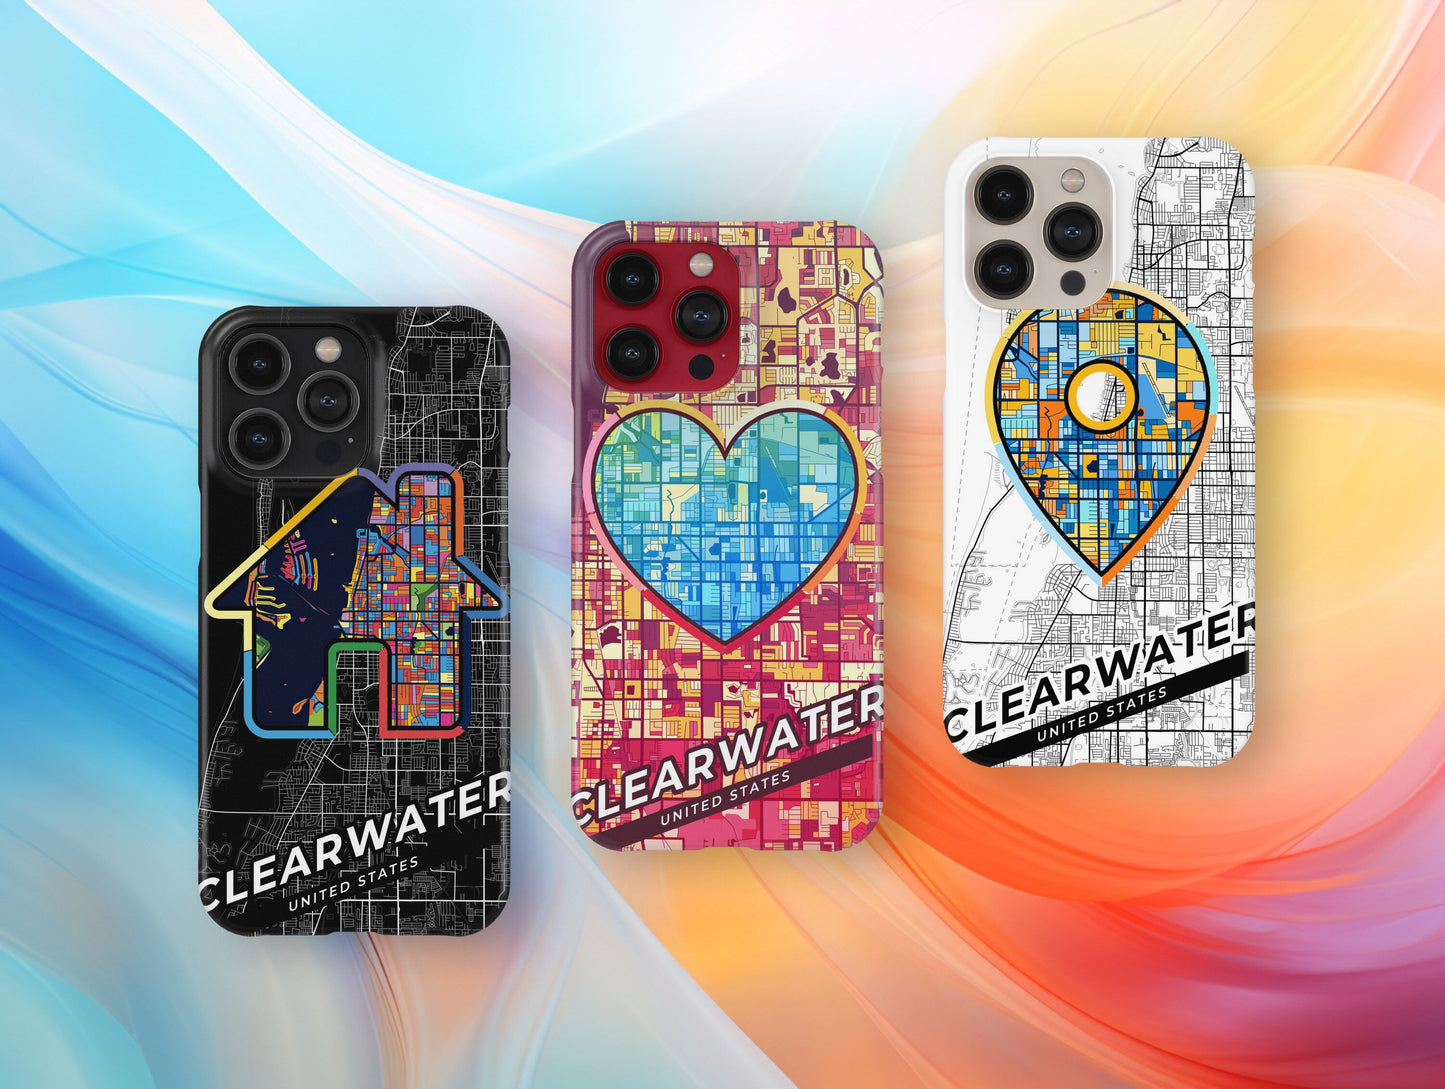 Clearwater Florida slim phone case with colorful icon. Birthday, wedding or housewarming gift. Couple match cases.